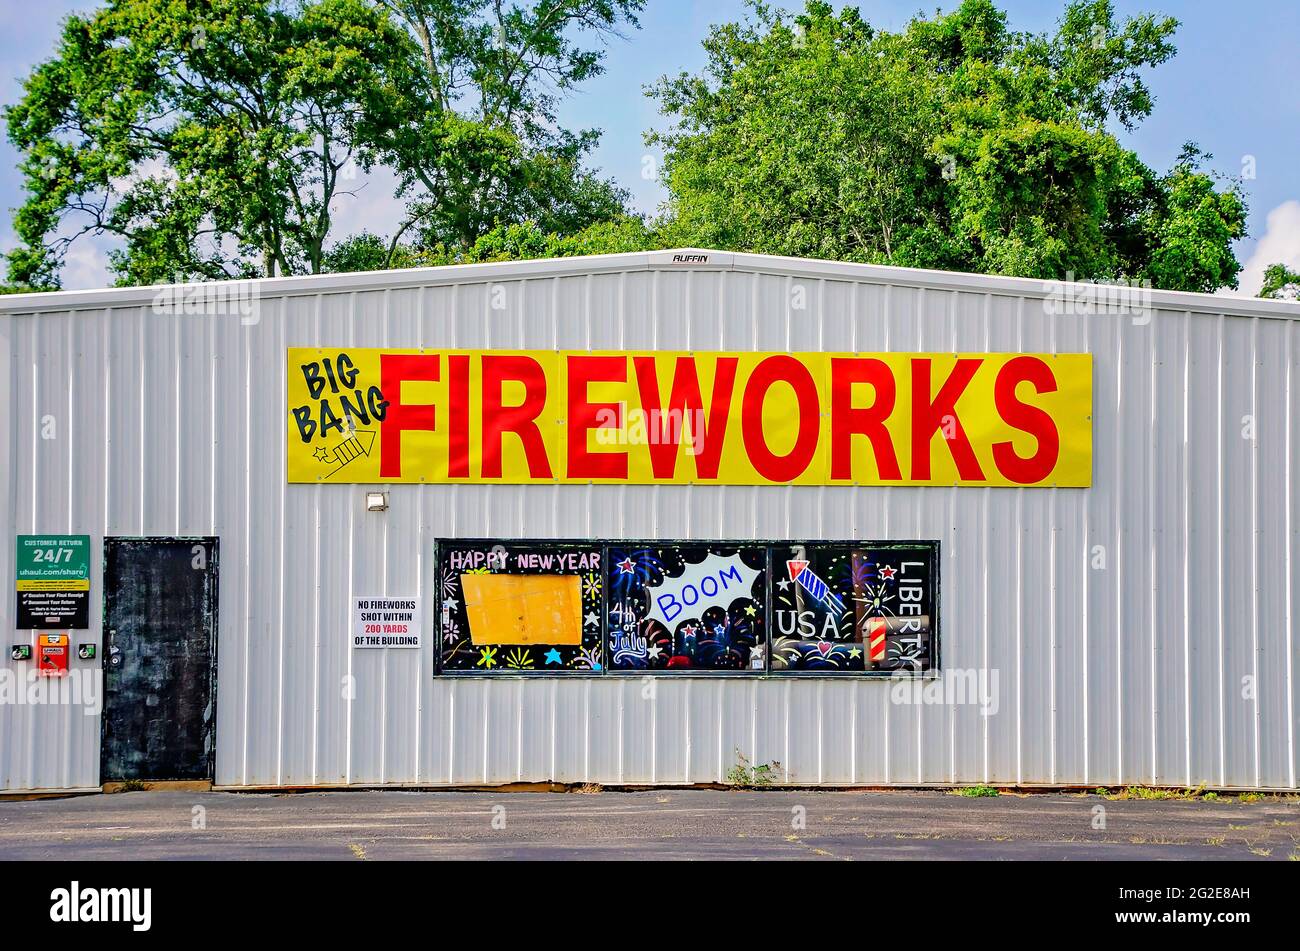 Big Bang Fireworks is pictured, June 9, 2021, in Theodore, Alabama. Roadside fireworks stands are a popular sight in the American South. Stock Photo